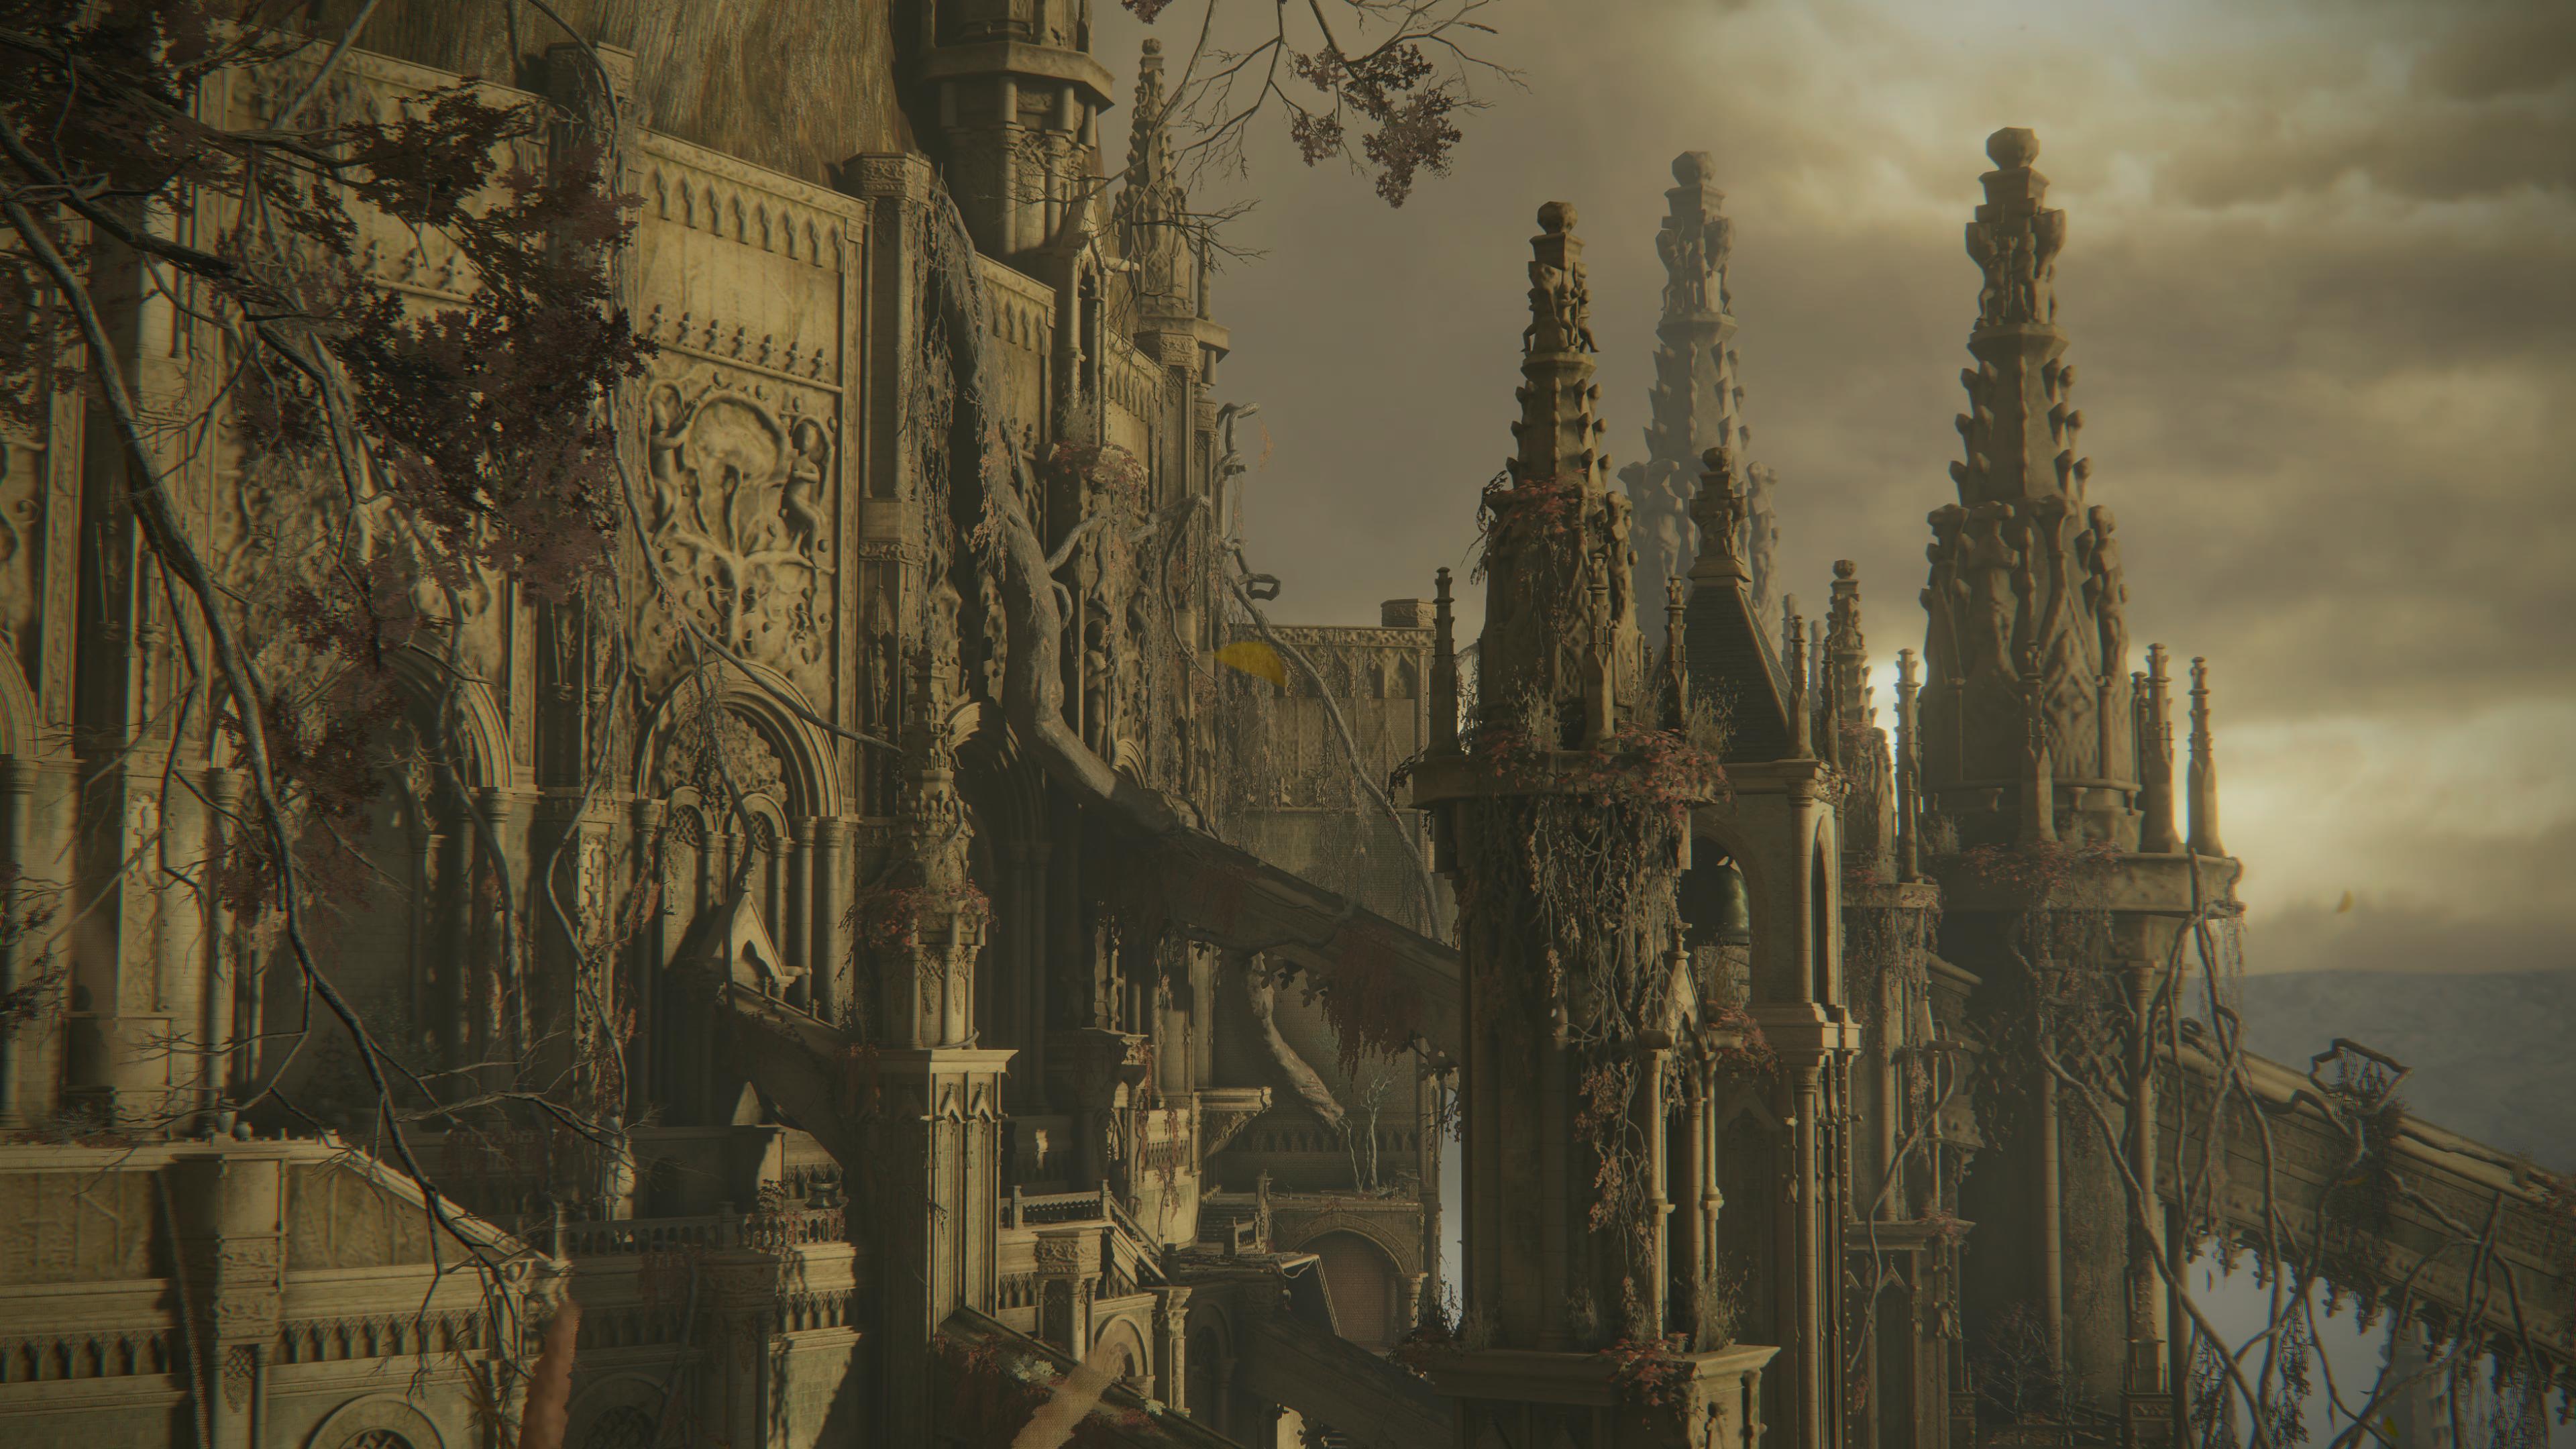 Elden Ring screenshot showing the spires and architecture of Elphael, Brace of the Haligtree